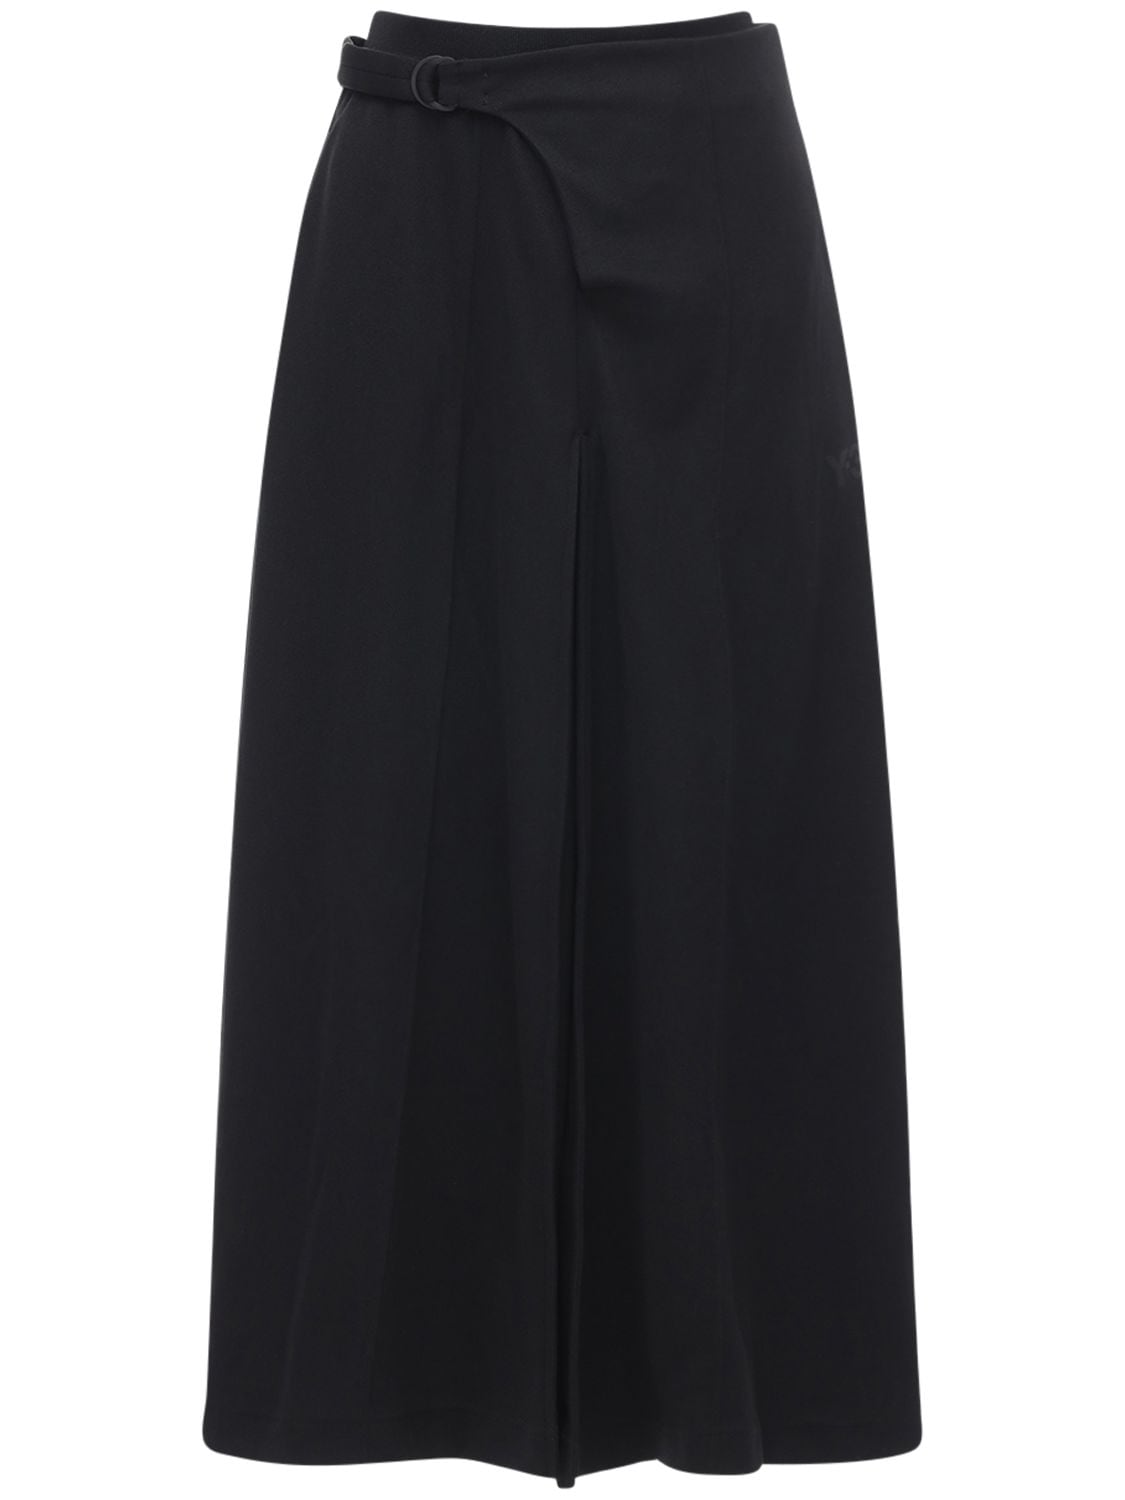 Y-3 CLASSIC TAILORED TRACK SKIRT,72IG62015-QKXBQ0S1